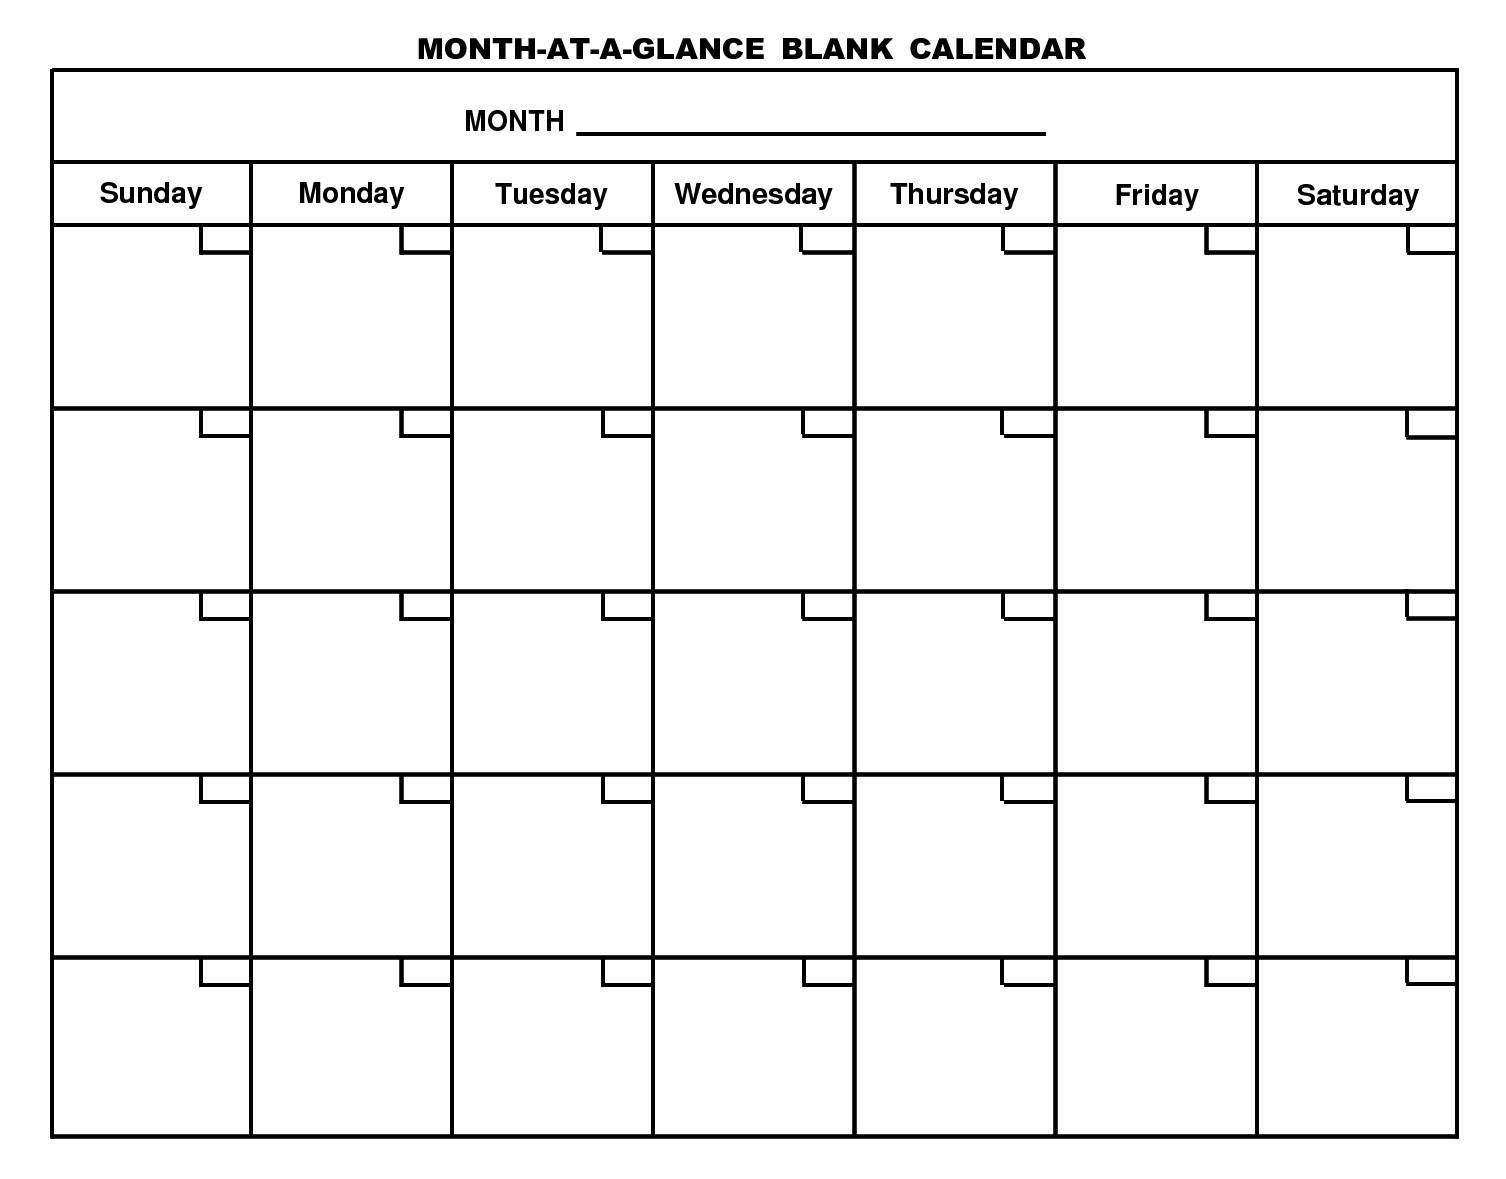 For Month At A Glance Blank Calendar Template - Free-Blank Month At A Glance Printable Calendar